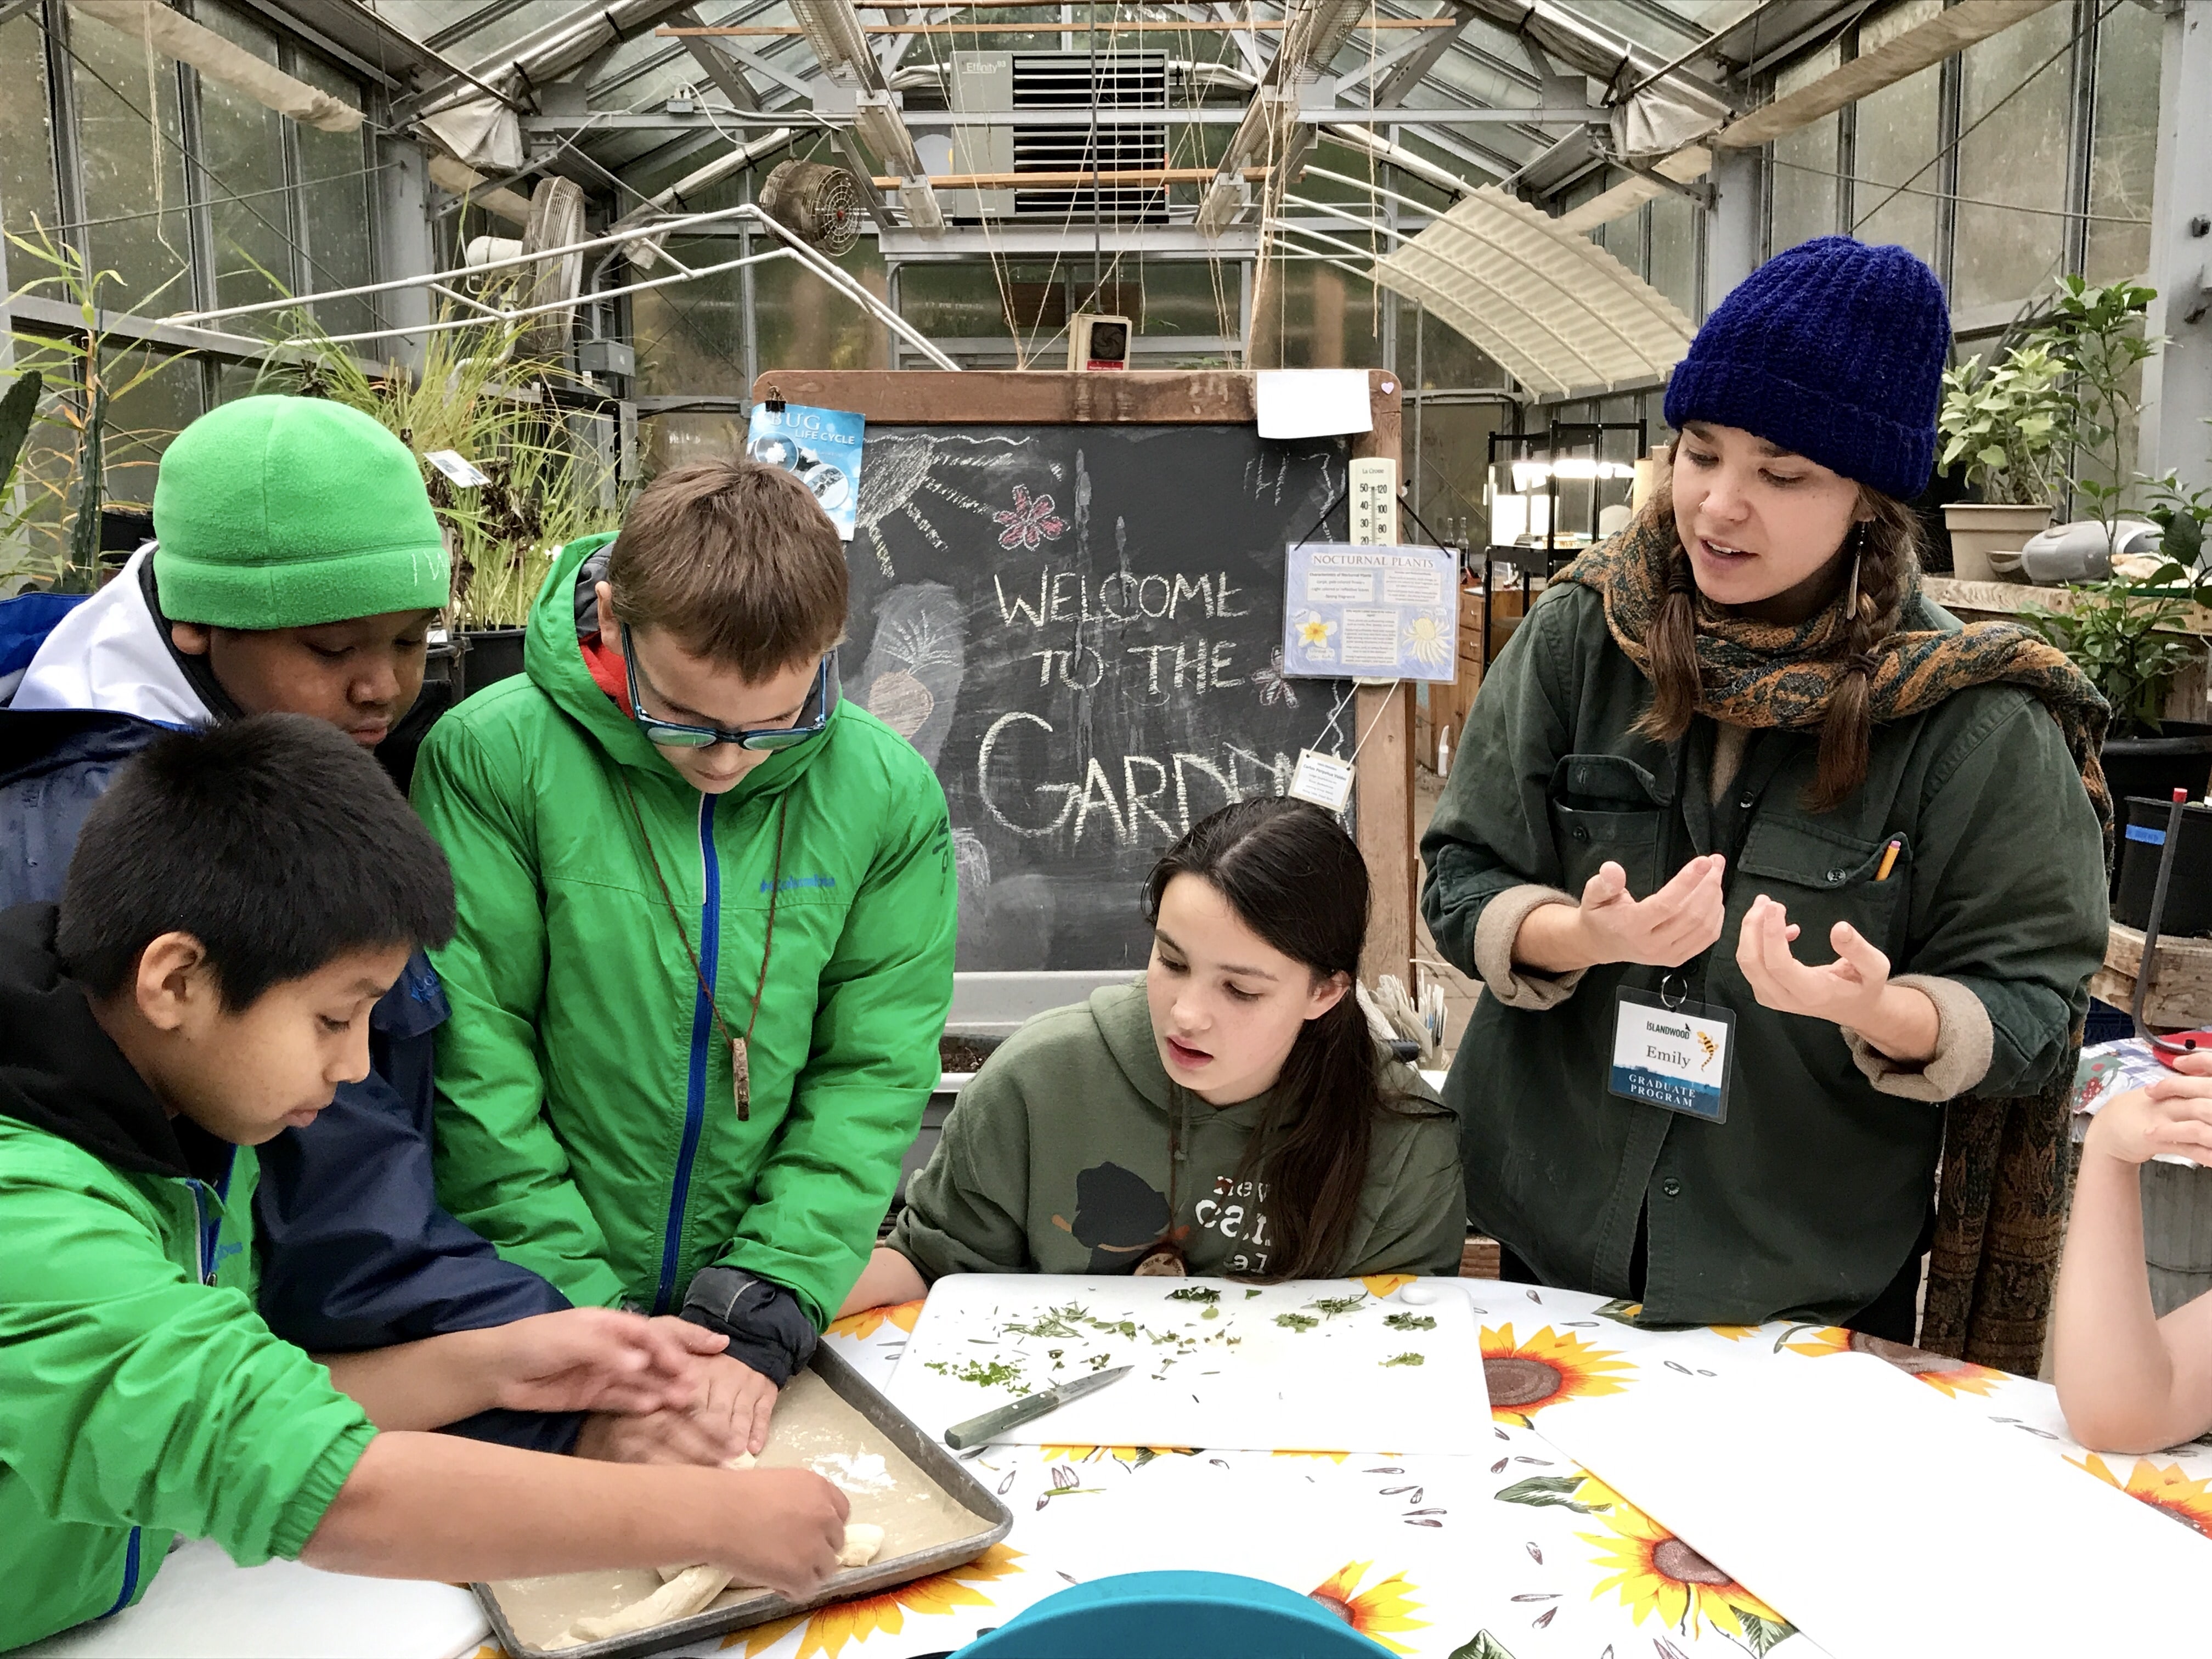 A student enrolled in IslandWood's Graduate Program in Environmental Education & Equity with their students in the greenhouse